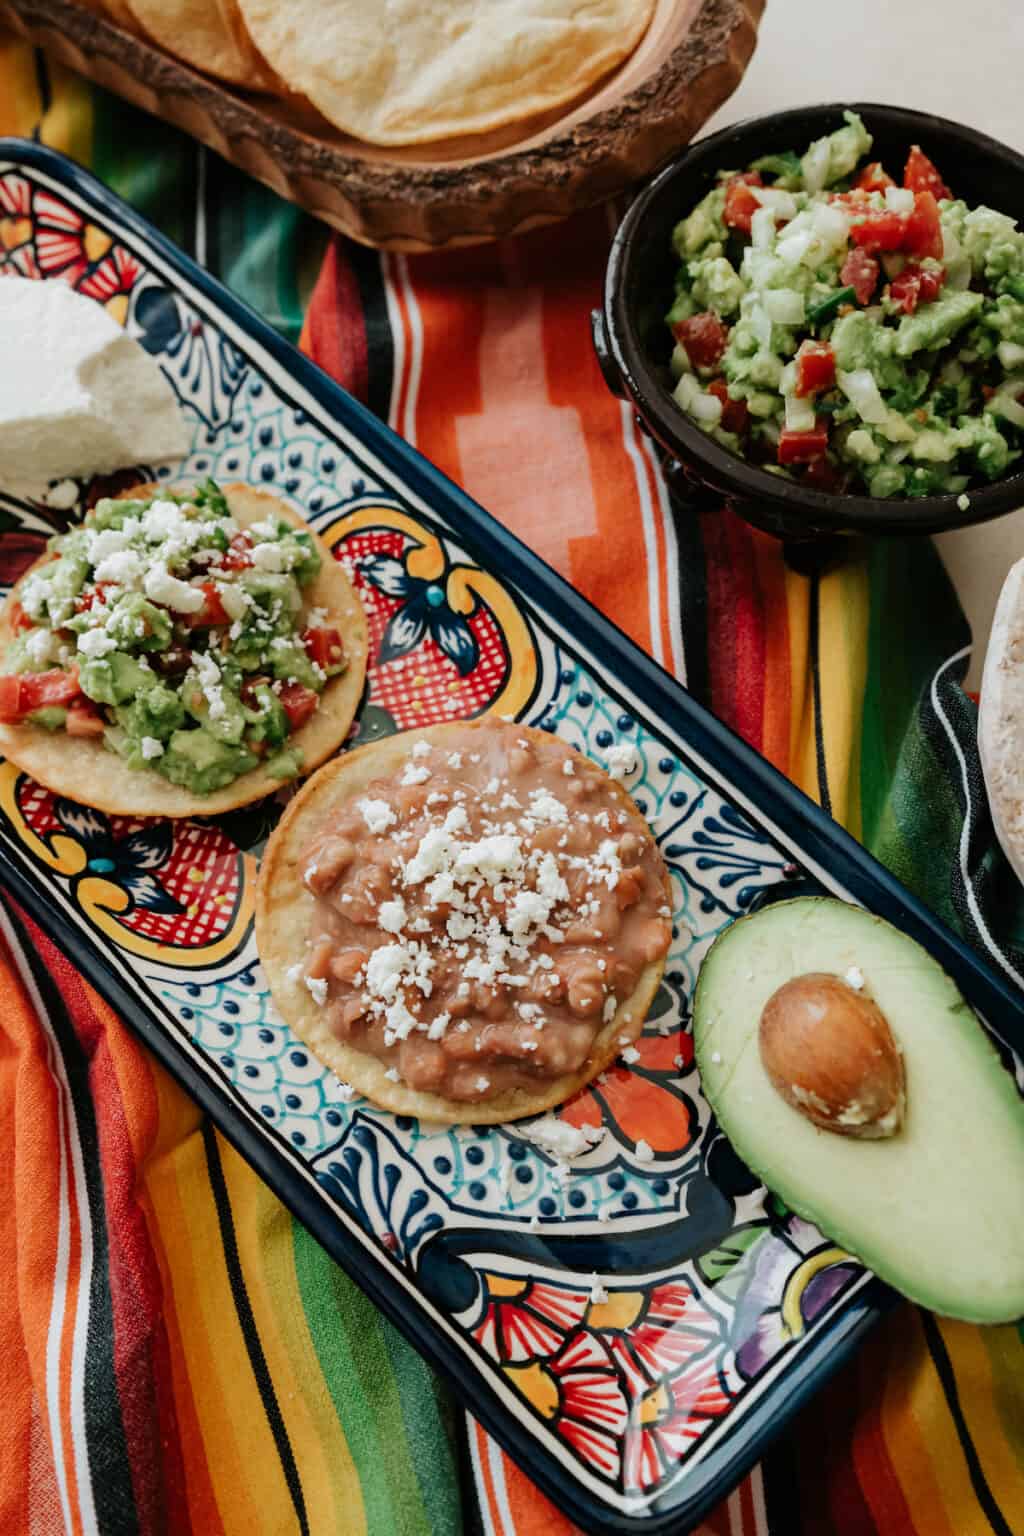 Vegetarian Mexican Tostadas With Refried Beans & Guacamole - Muy Bueno